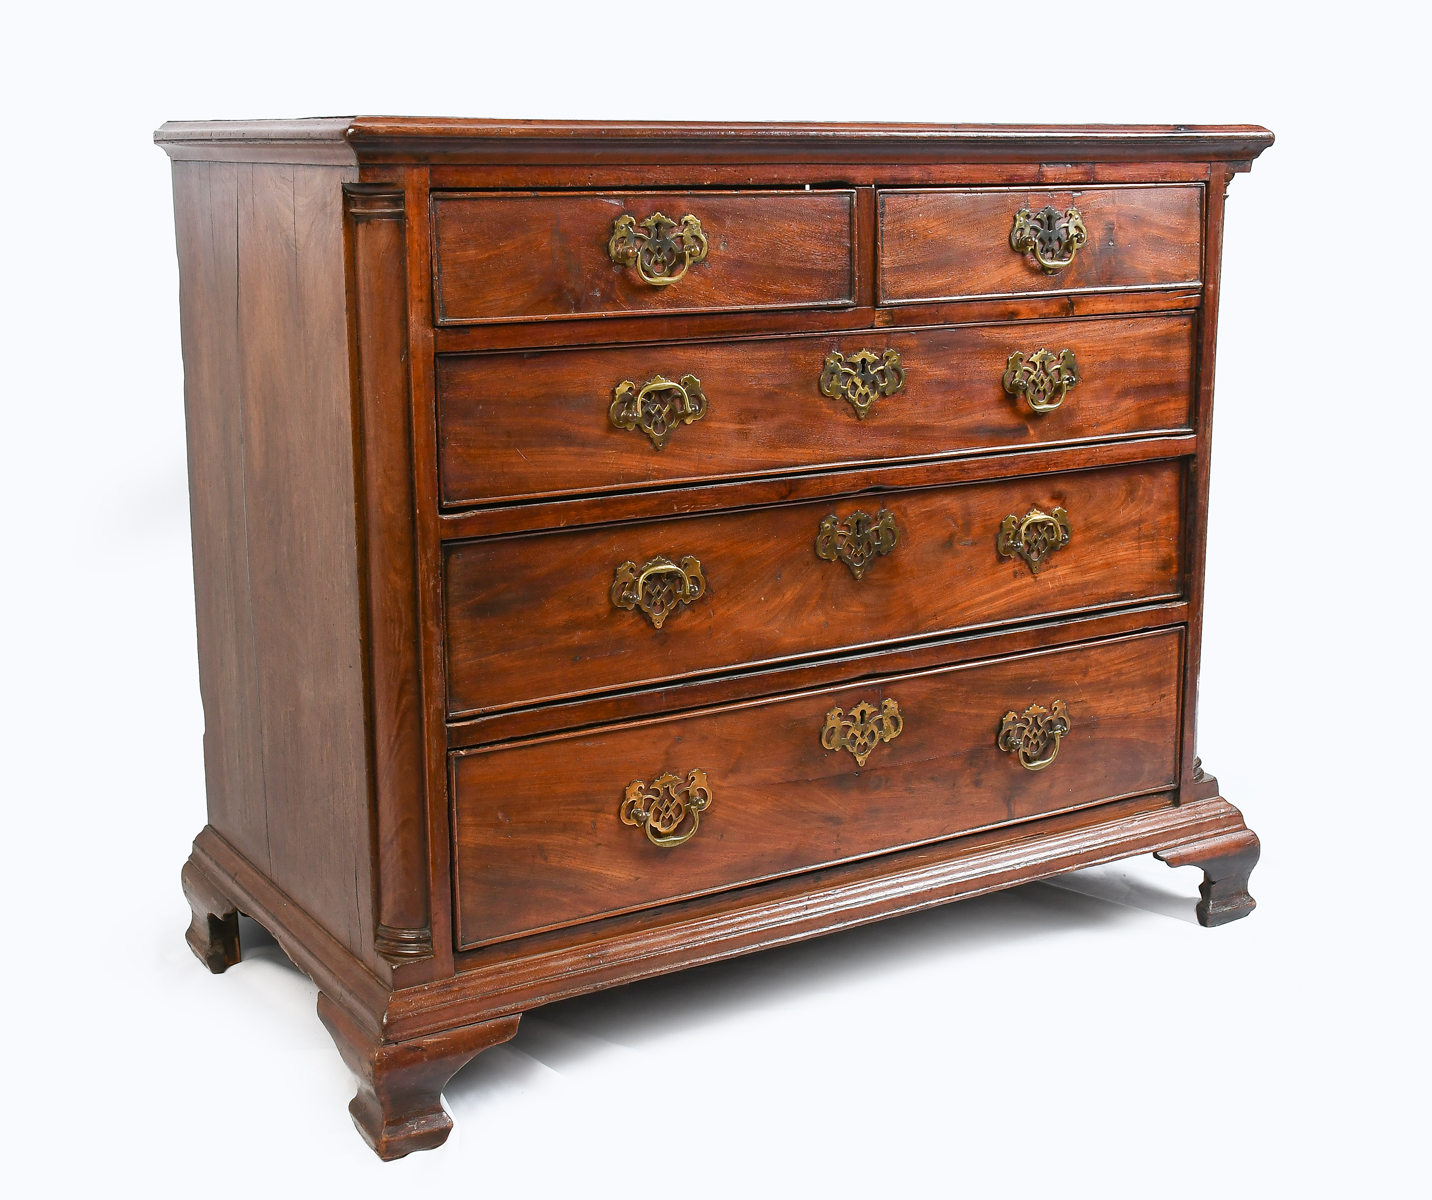 5 DRAWER GEORGIAN CHEST: Two drawers,